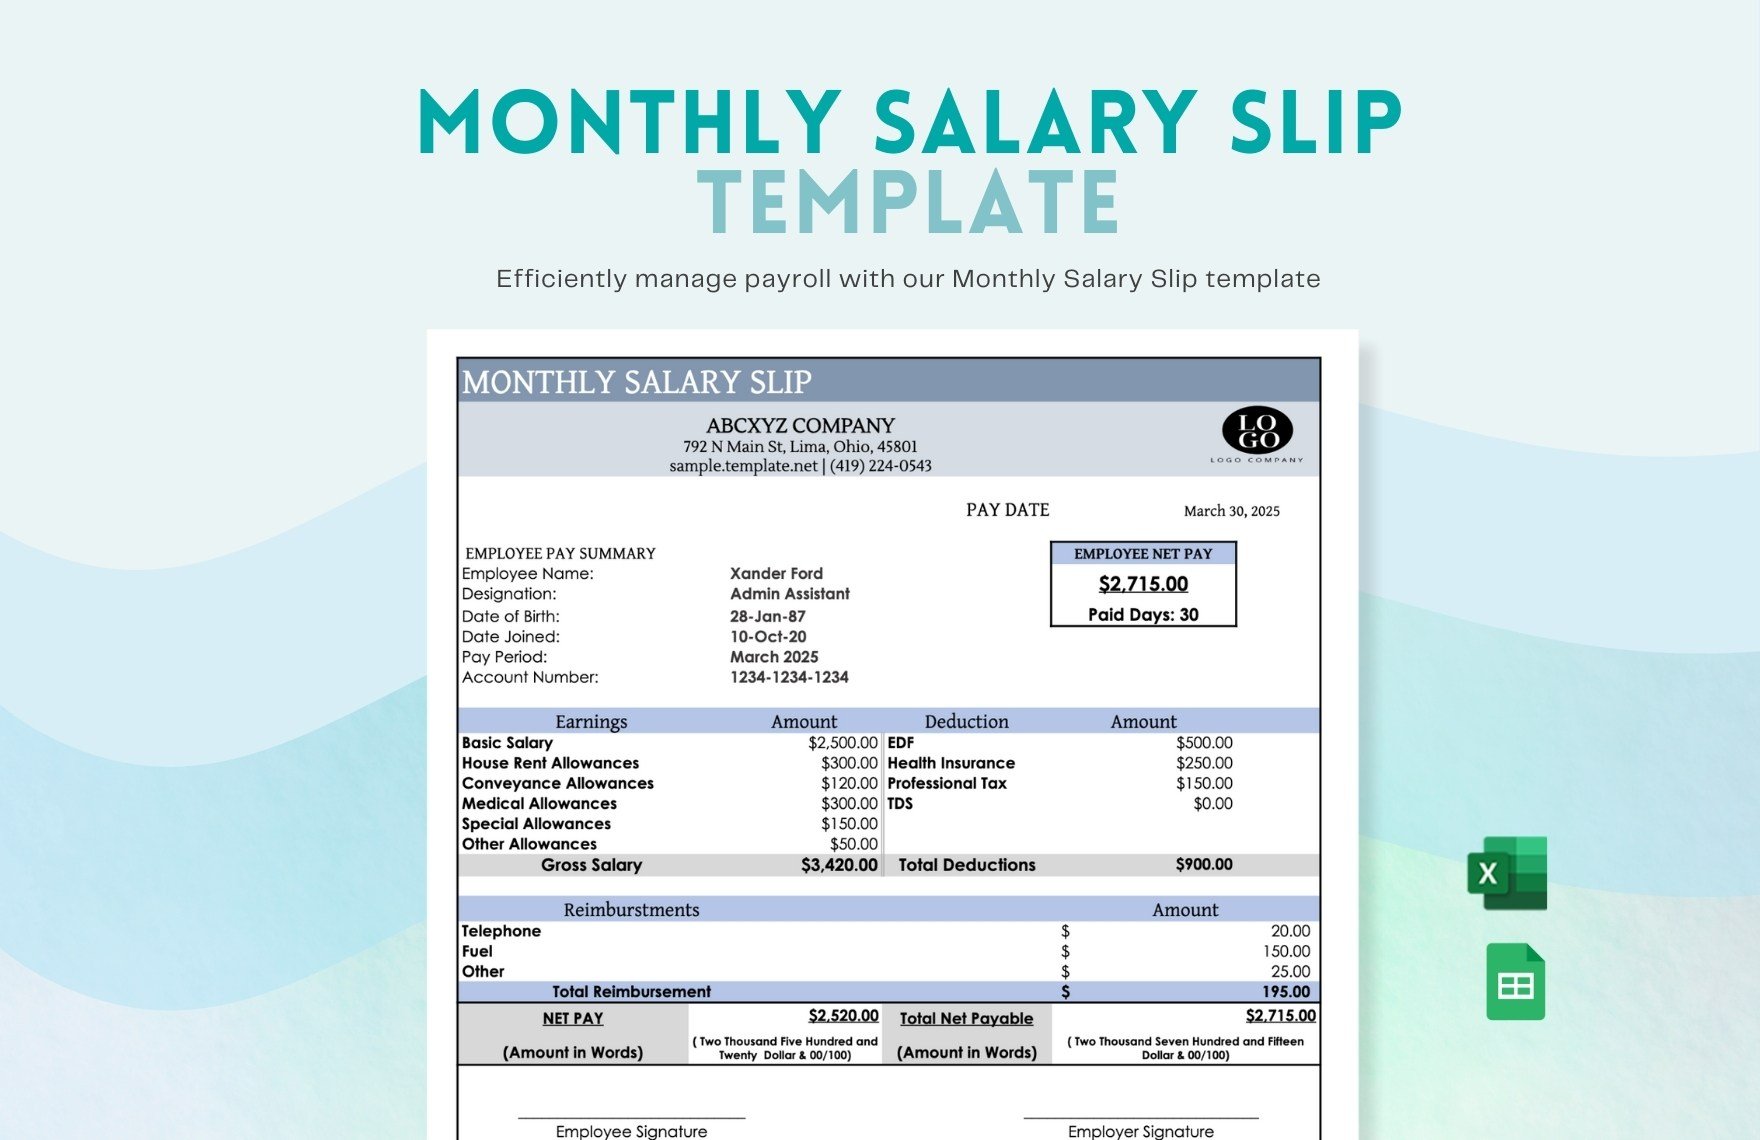 Monthly Salary Slip in Excel, Google Sheets